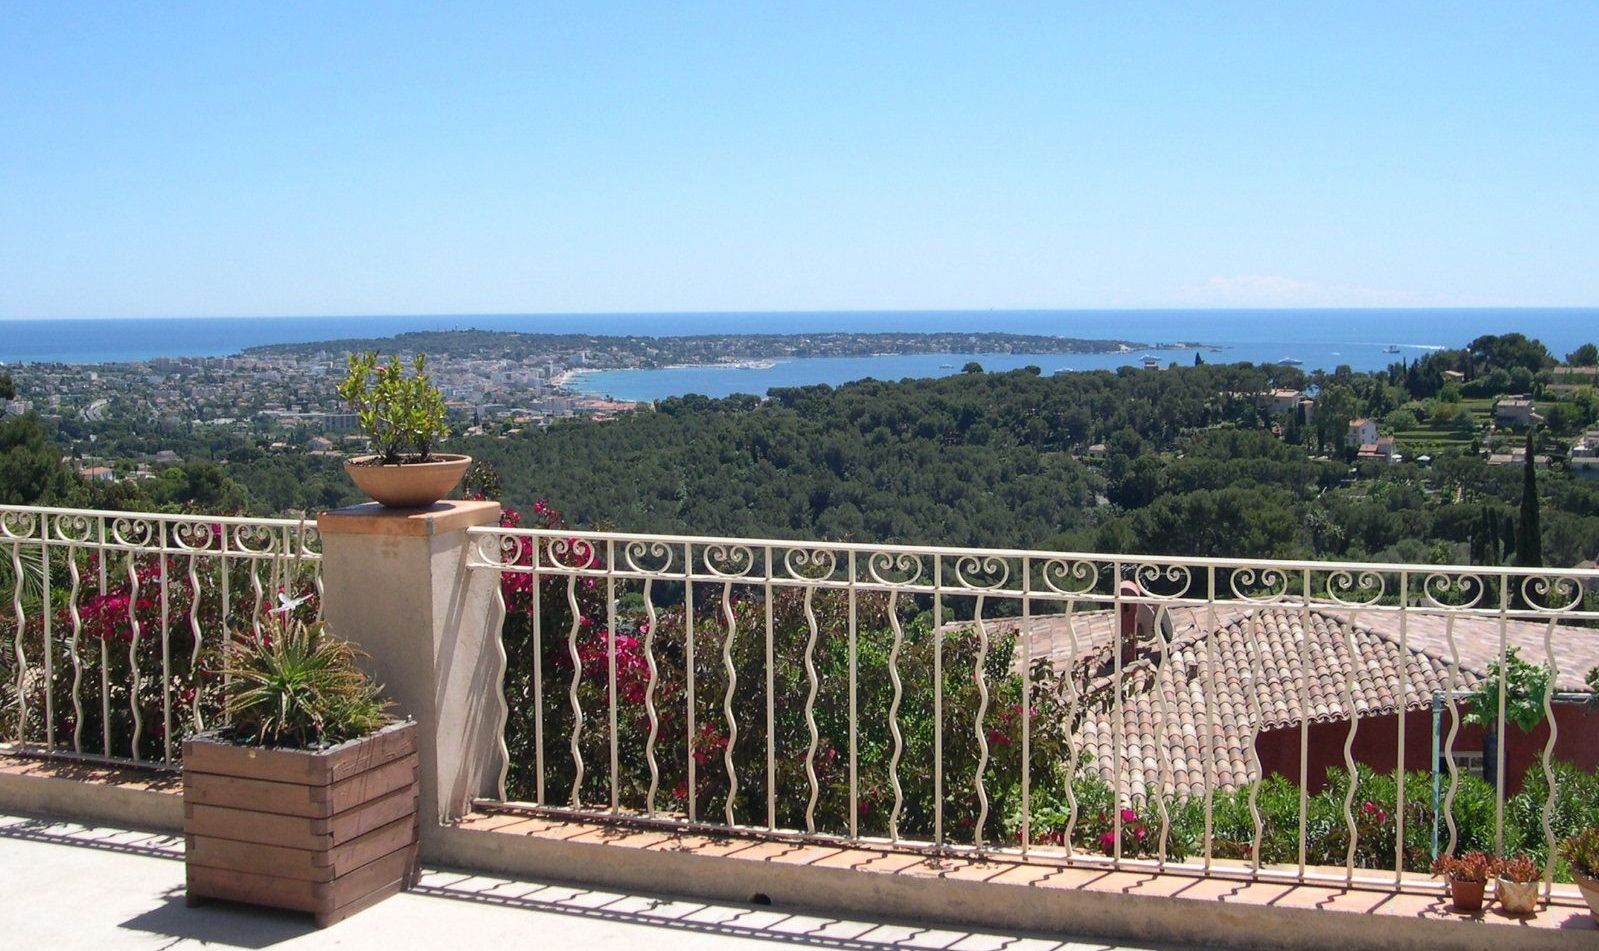 We have a wide range of quality apartments and villas for sale on the Côte d'Azur